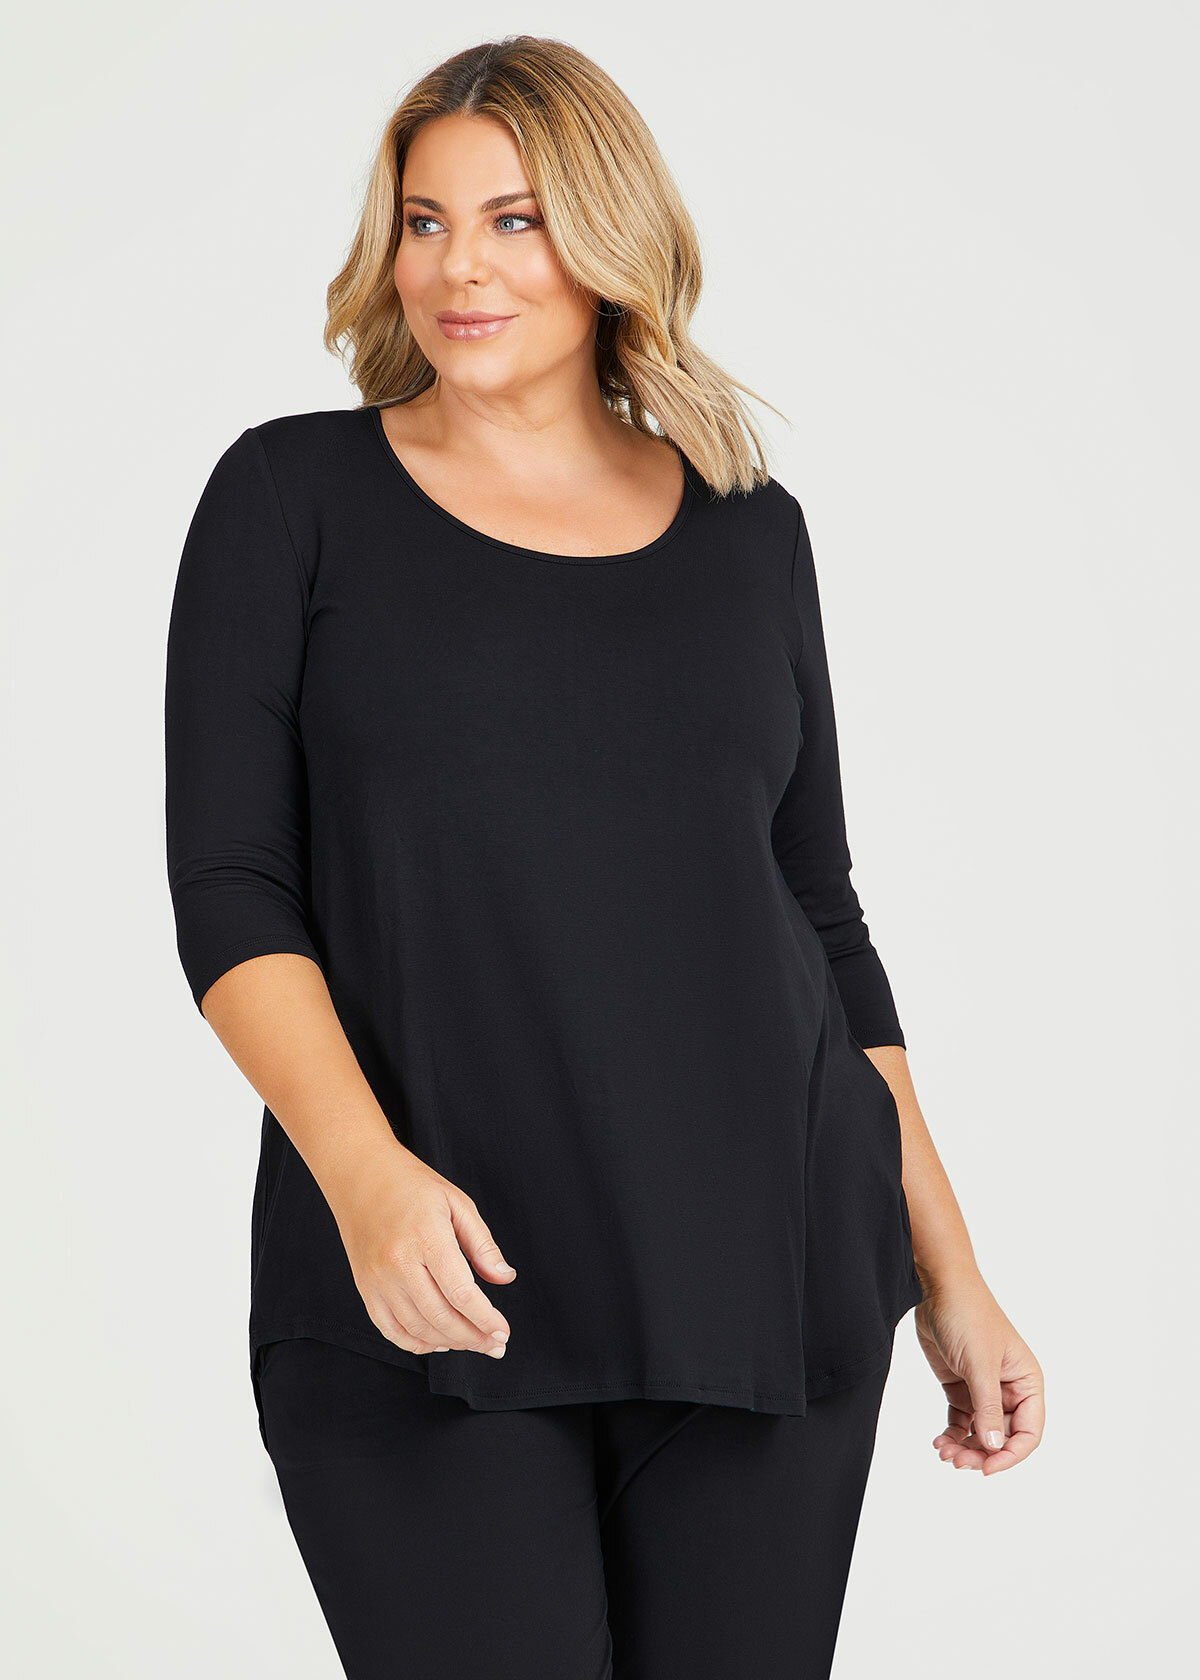 Shop Plus Size Bamboo Base 3/4 Sleeve Top in Black